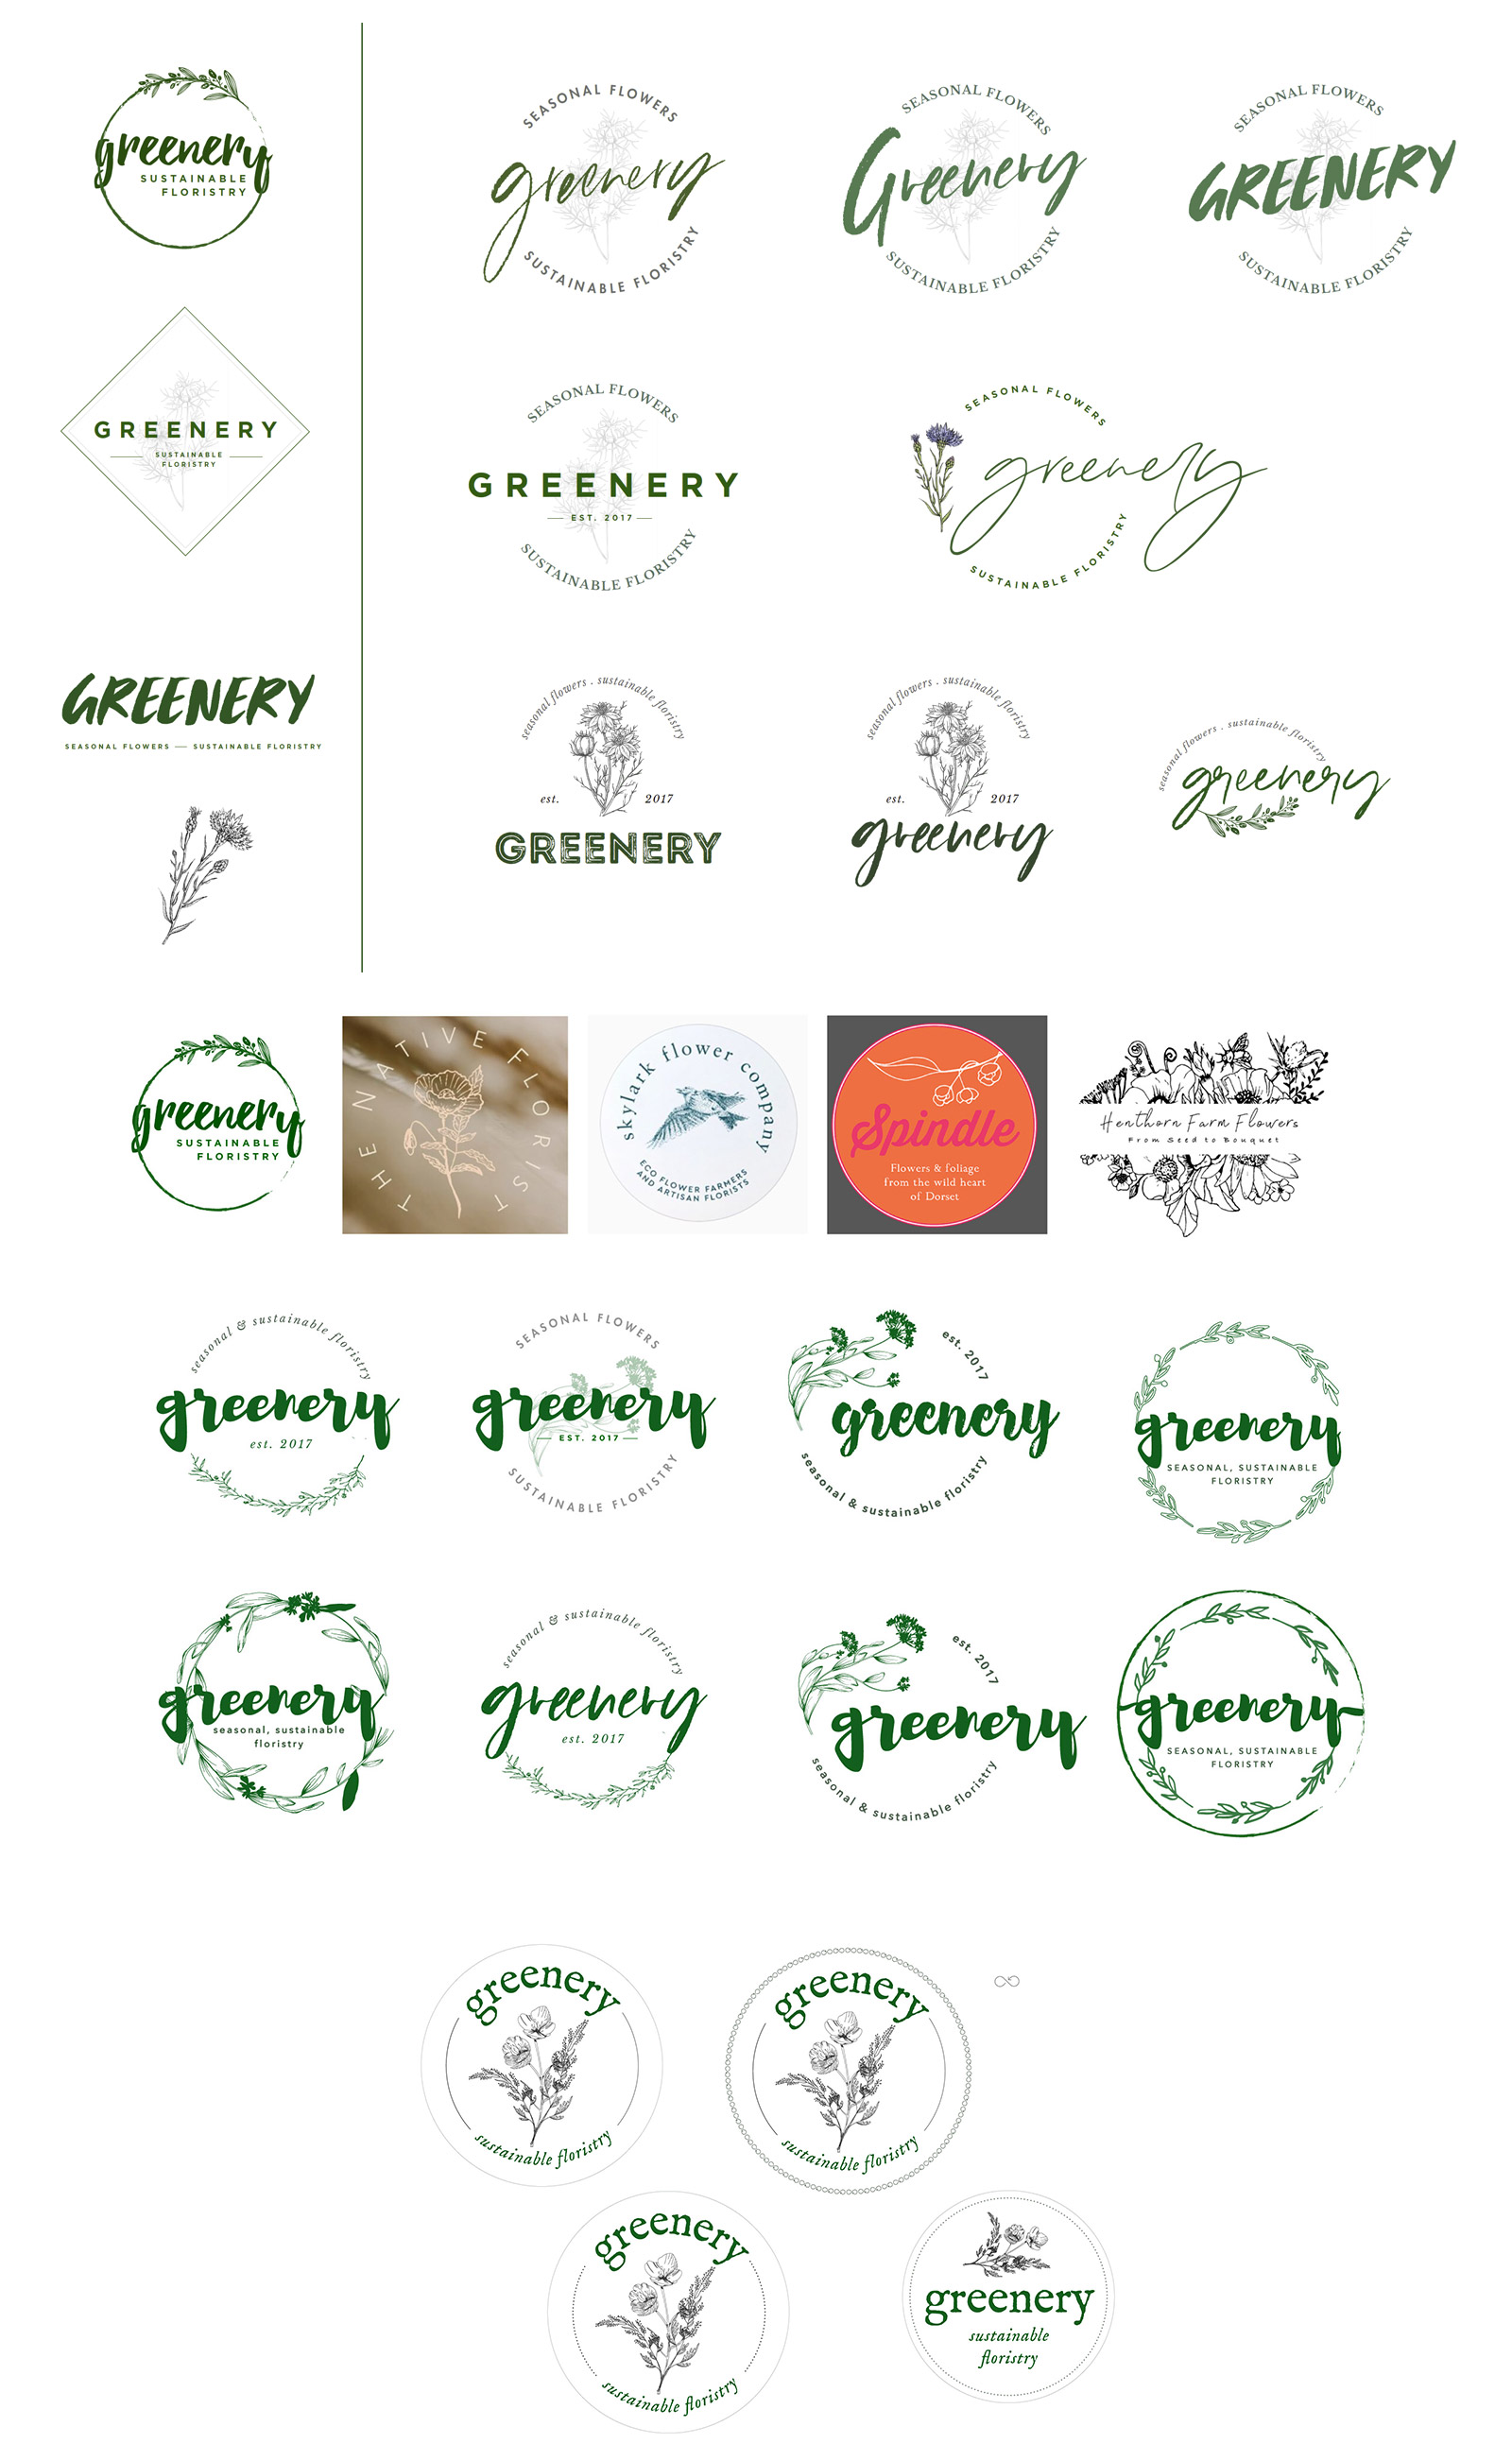 concept logos for Greenery